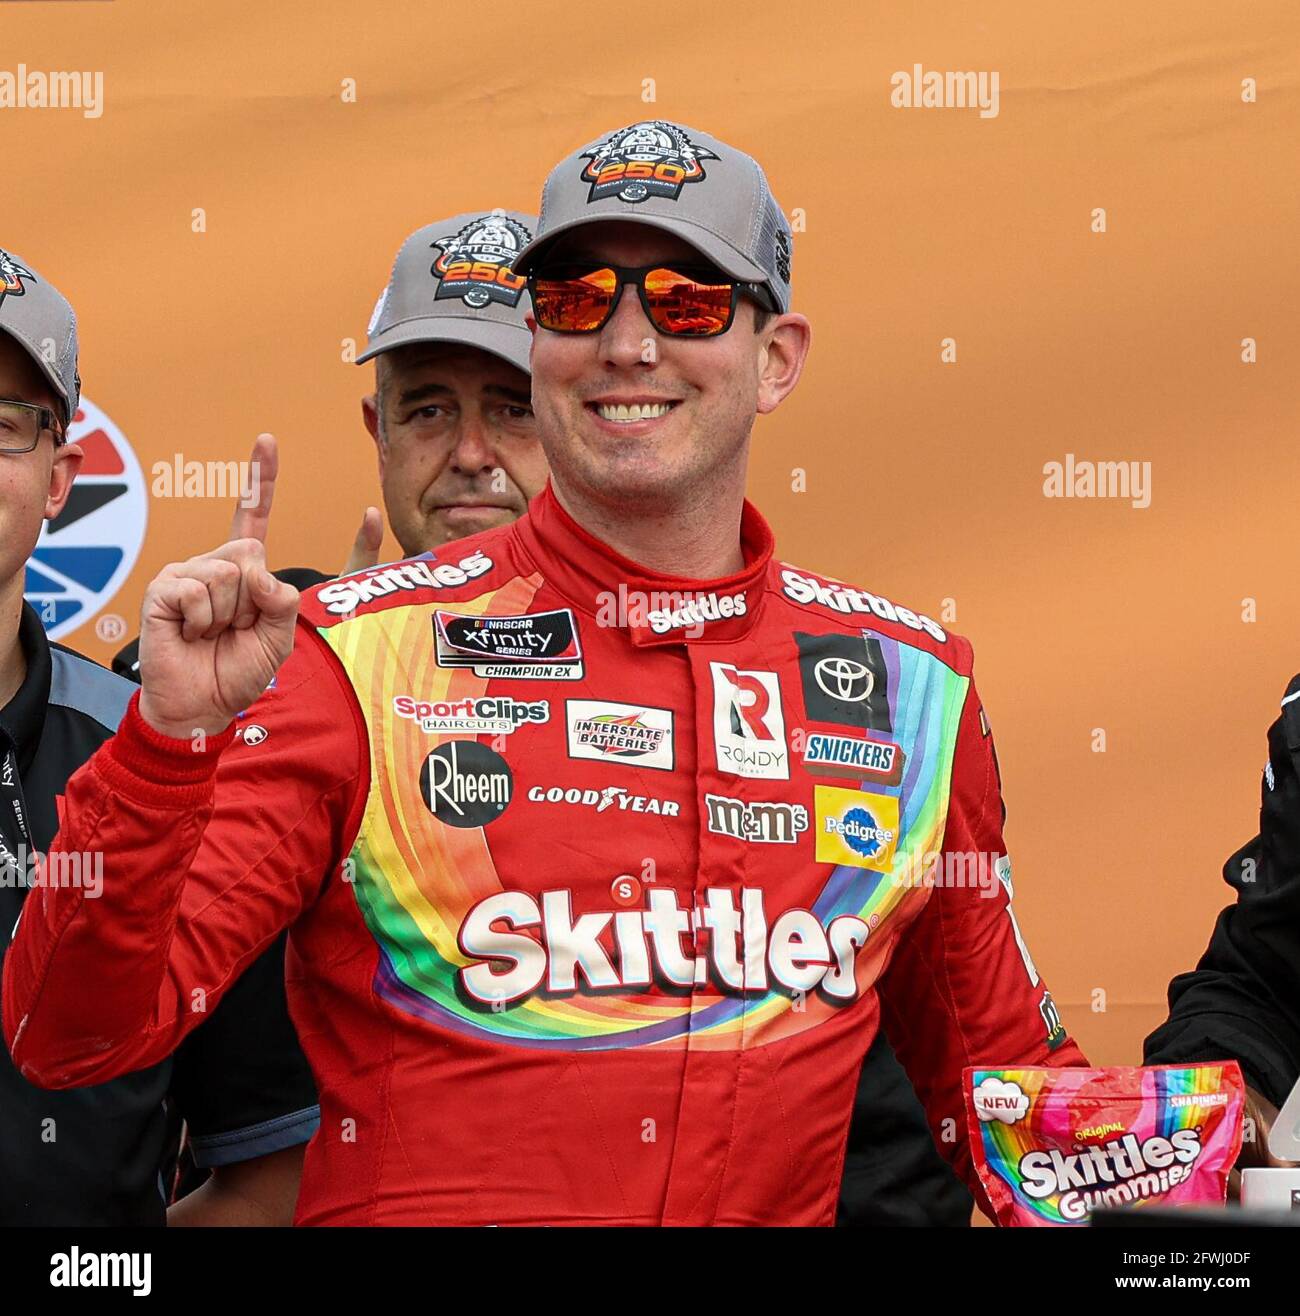 Austin, Texas, USA. 22nd May, 2021. KYLE BUSCH (54) celebrates after winning the inaugural NASCAR Xfinity Series Pit Boss 250 at the Circuit of the Americas. Credit: Scott Coleman/ZUMA Wire/Alamy Live News Stock Photo